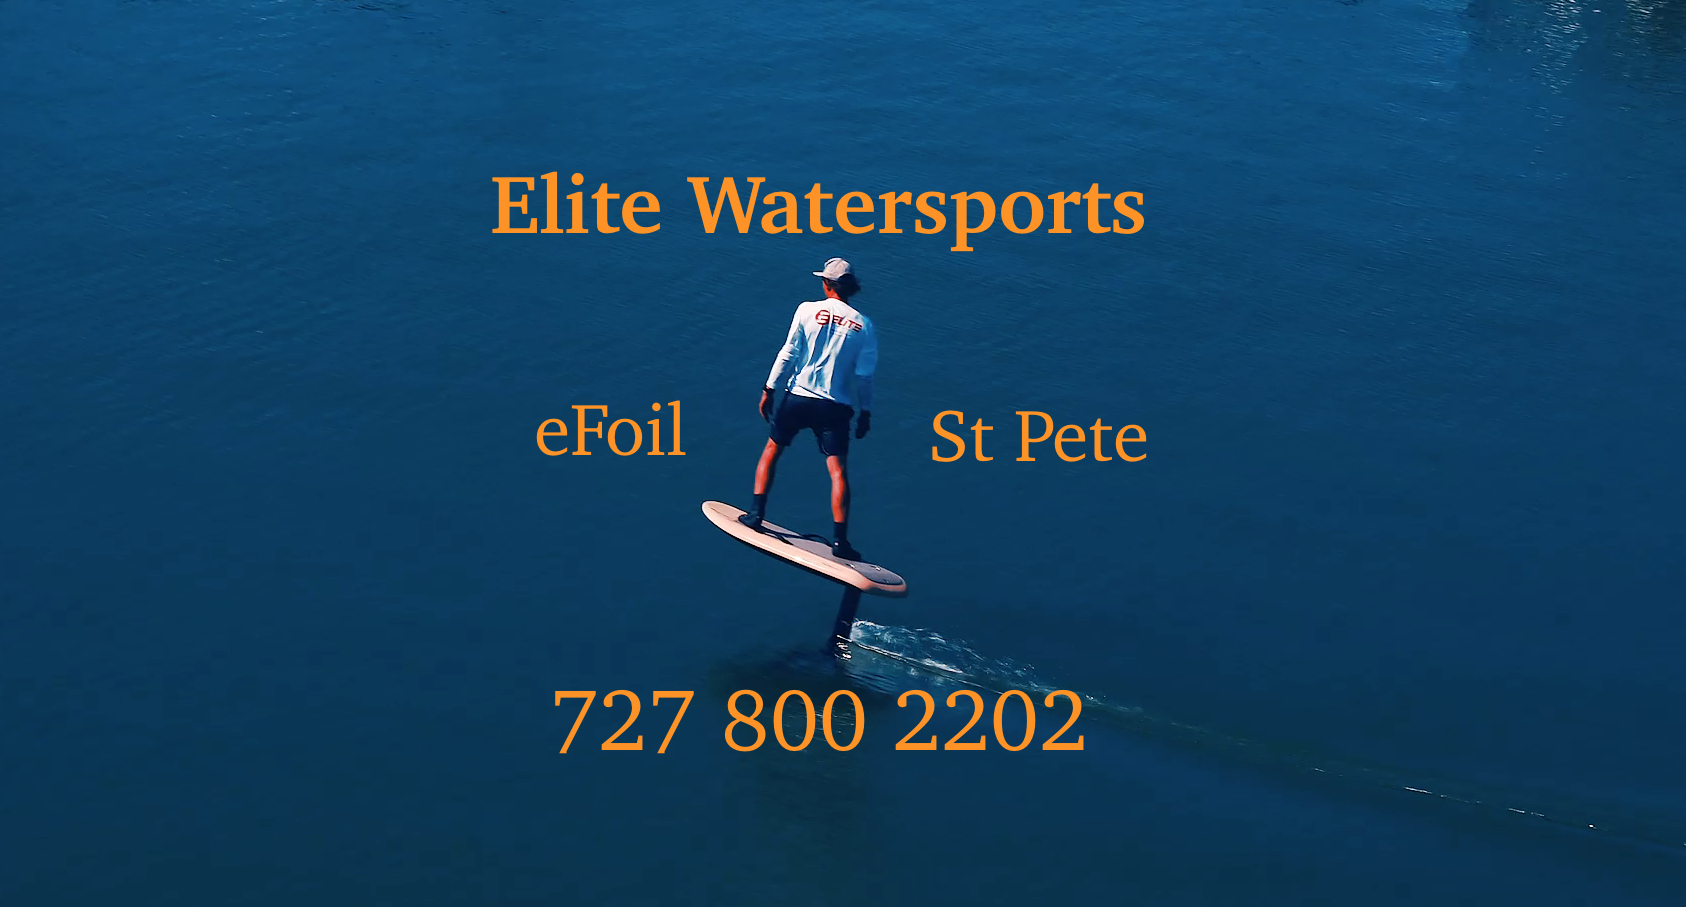 Want to get away? Rent an "eFoil" - Elite Watersports